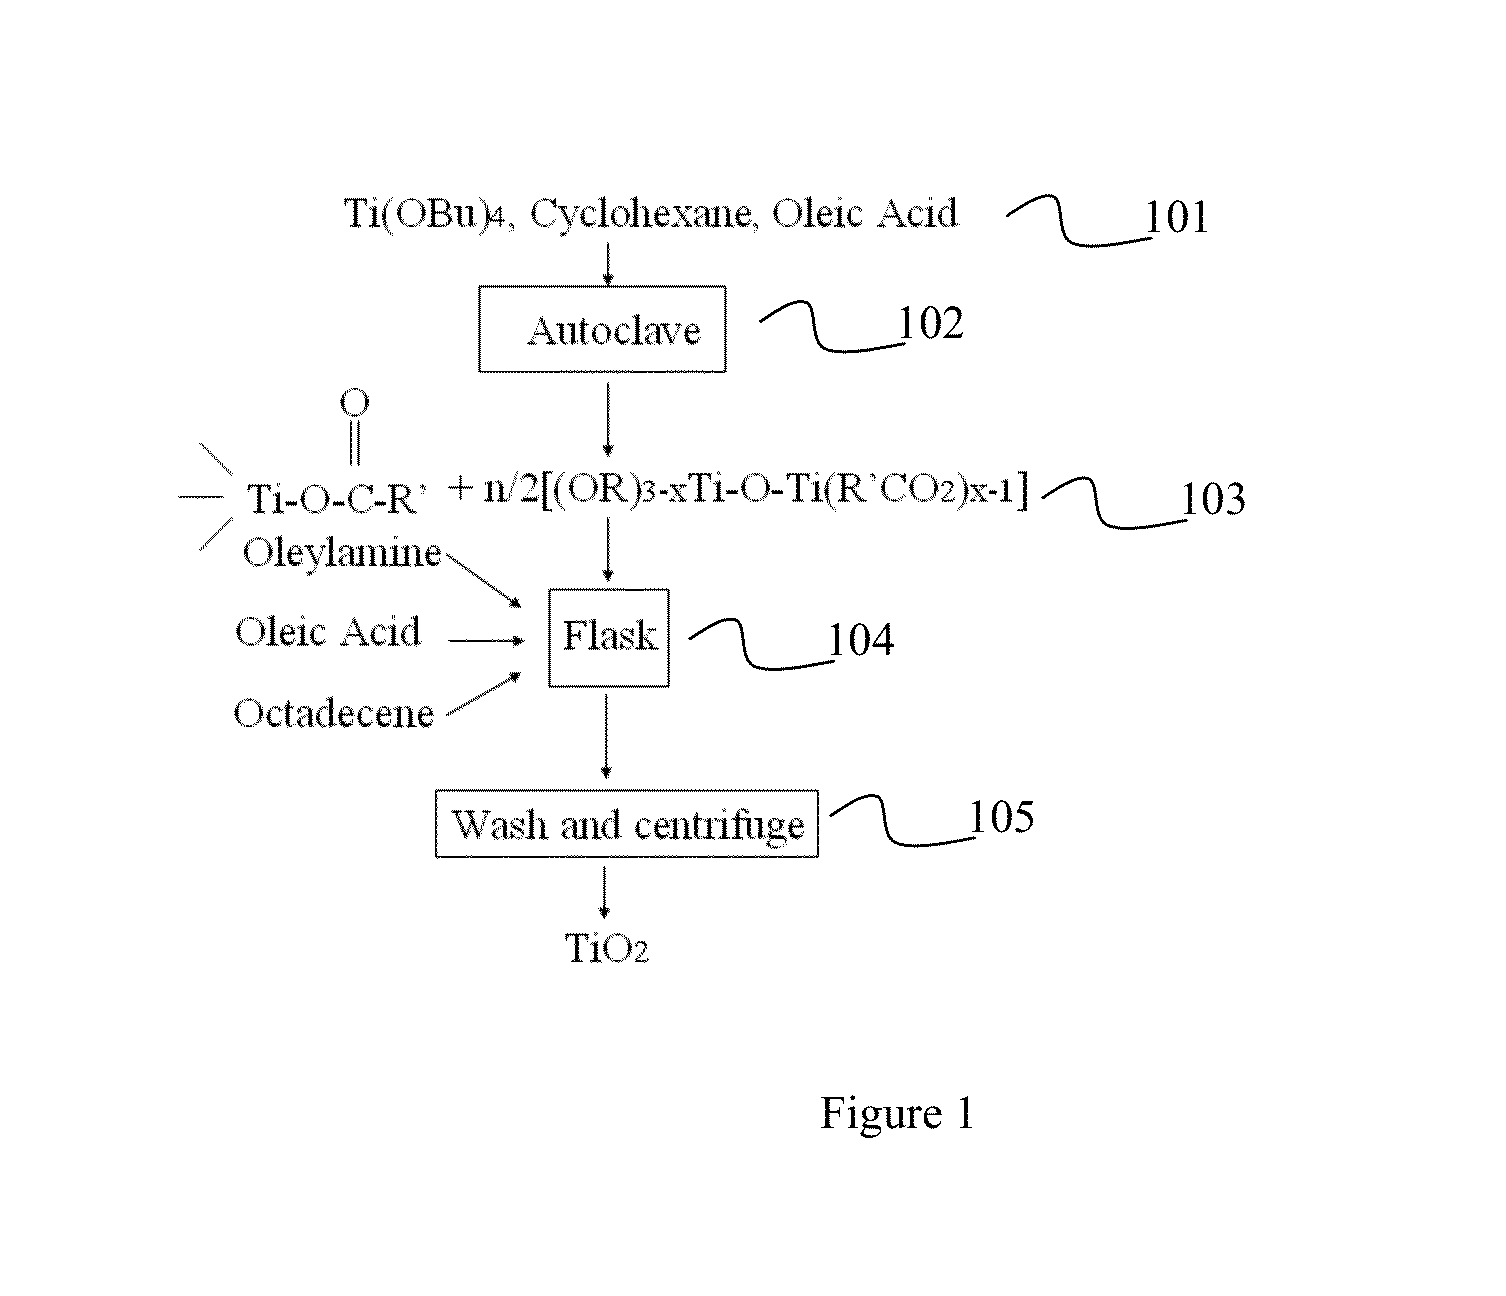 Method for synthesising a nano-product